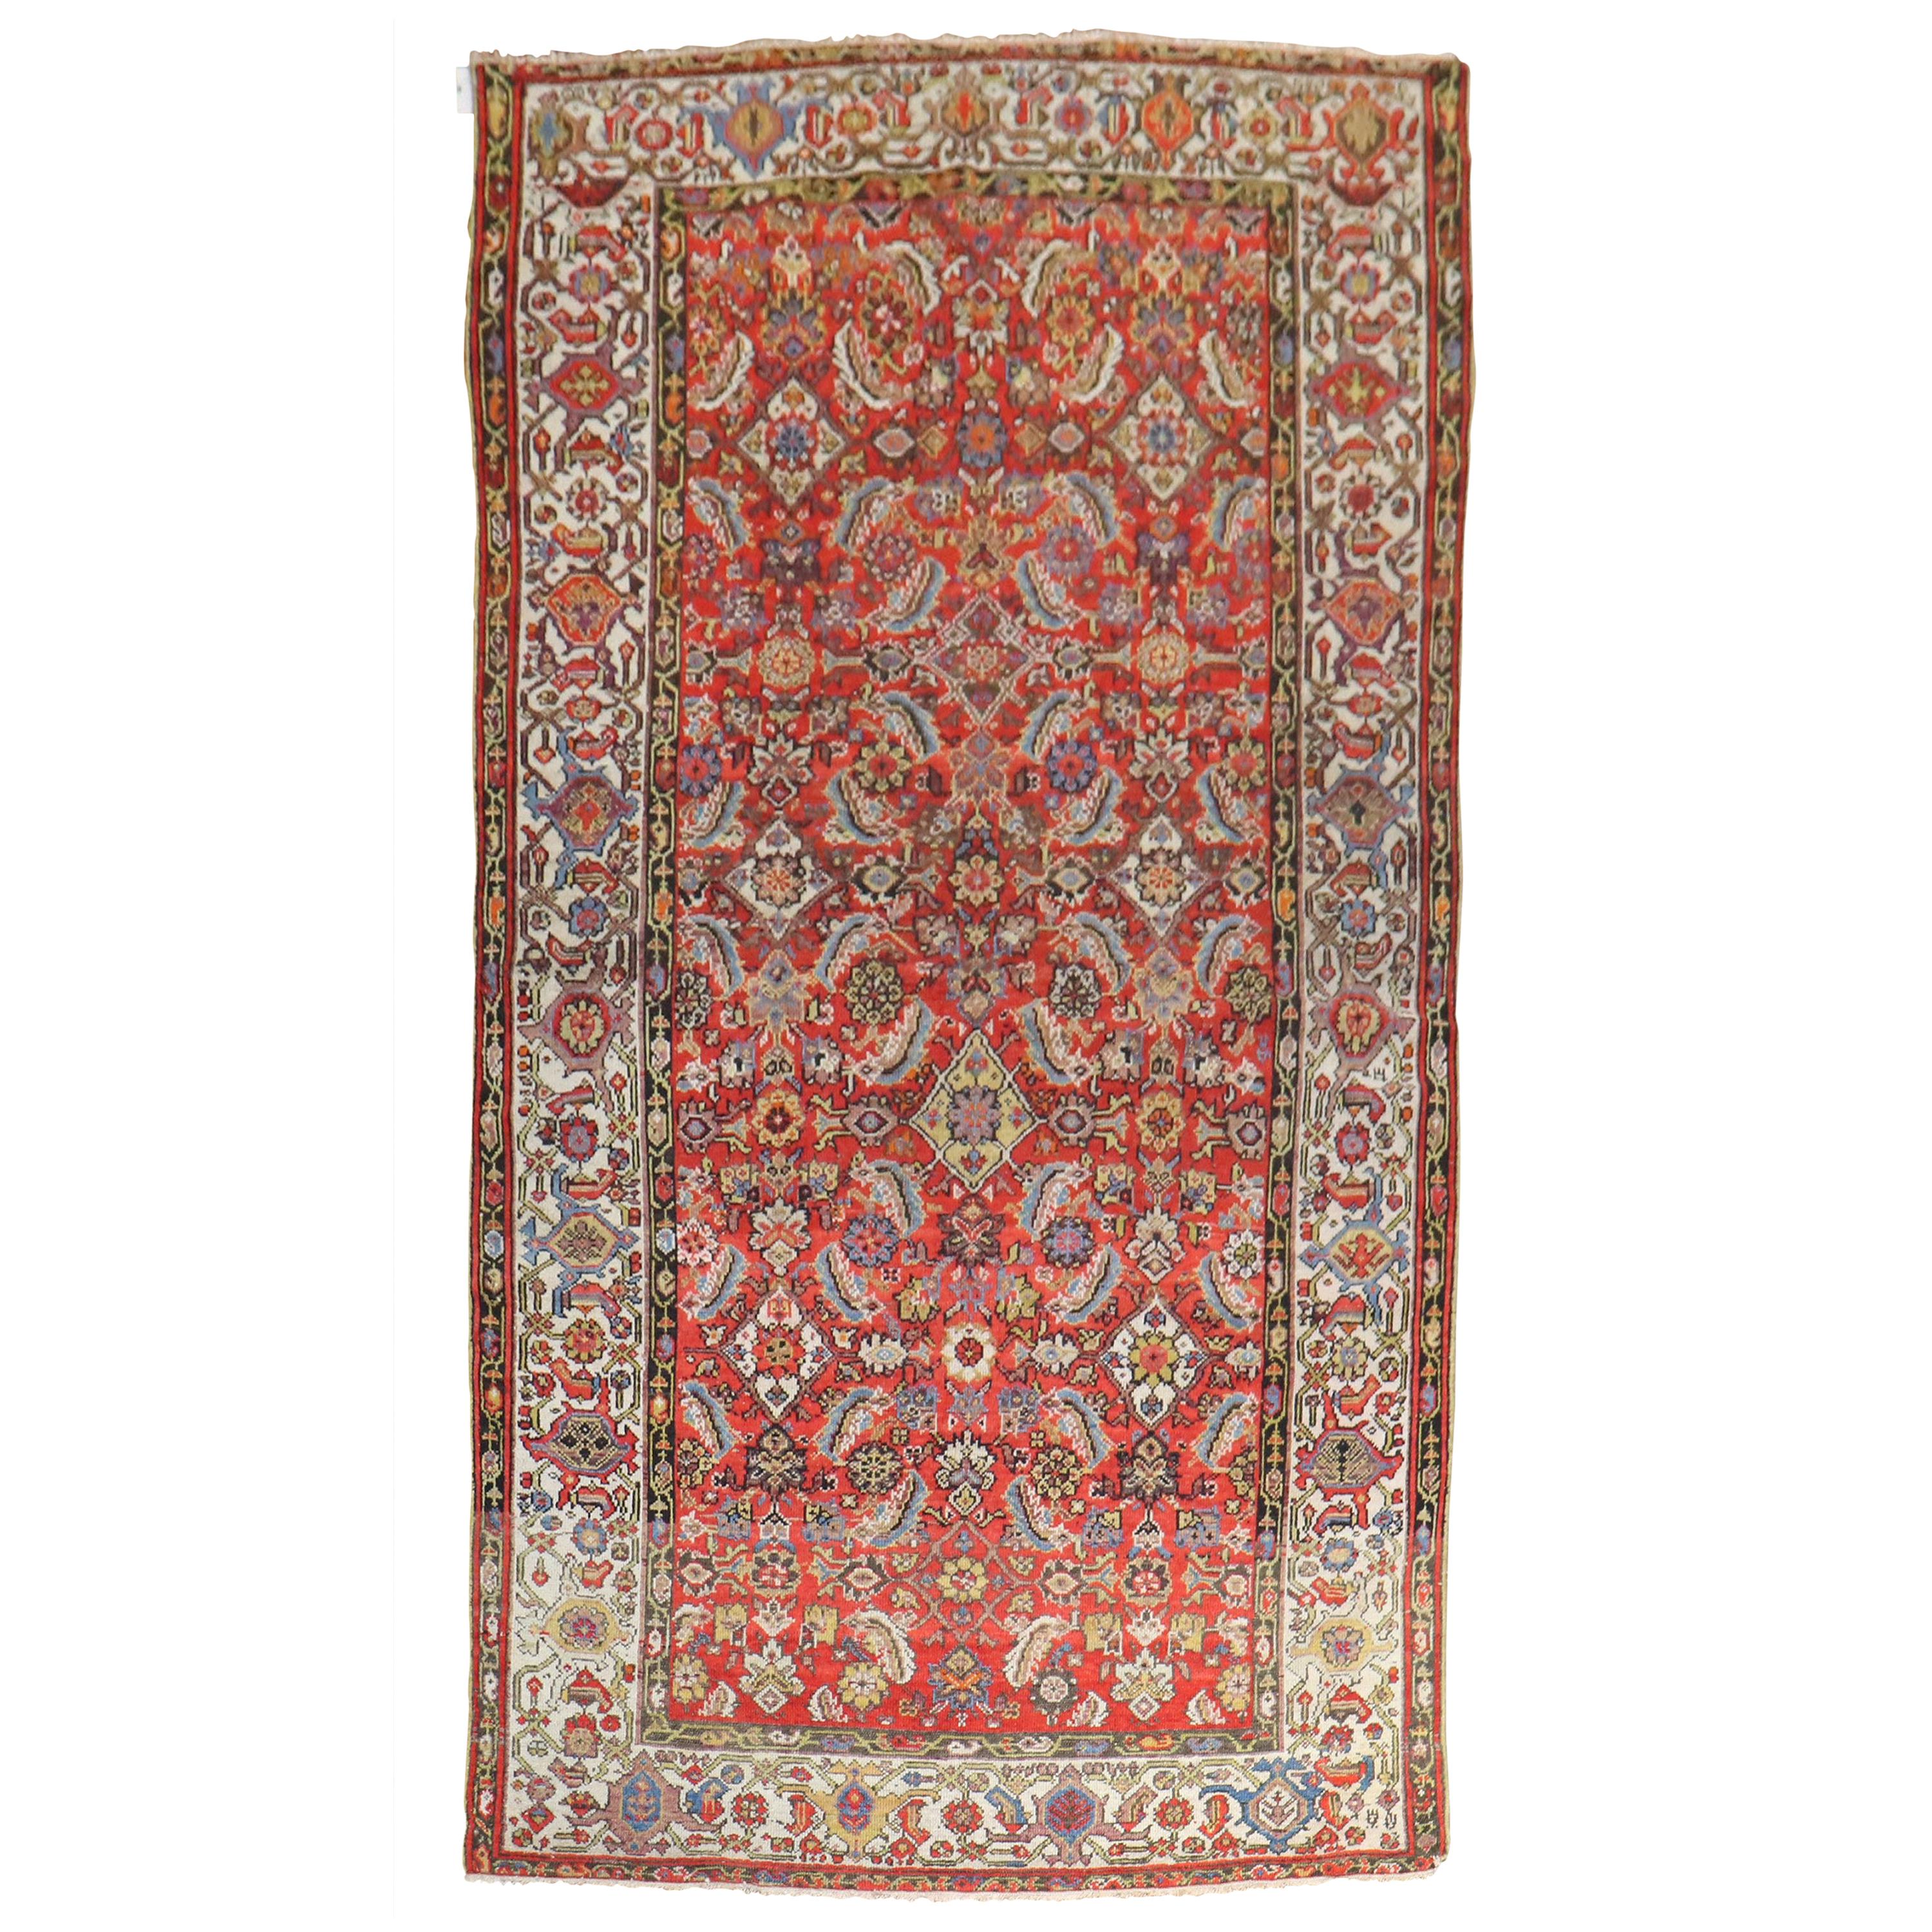 Early 20th Century Traditional Persian Malayer Rug with Red Herati Design Field For Sale